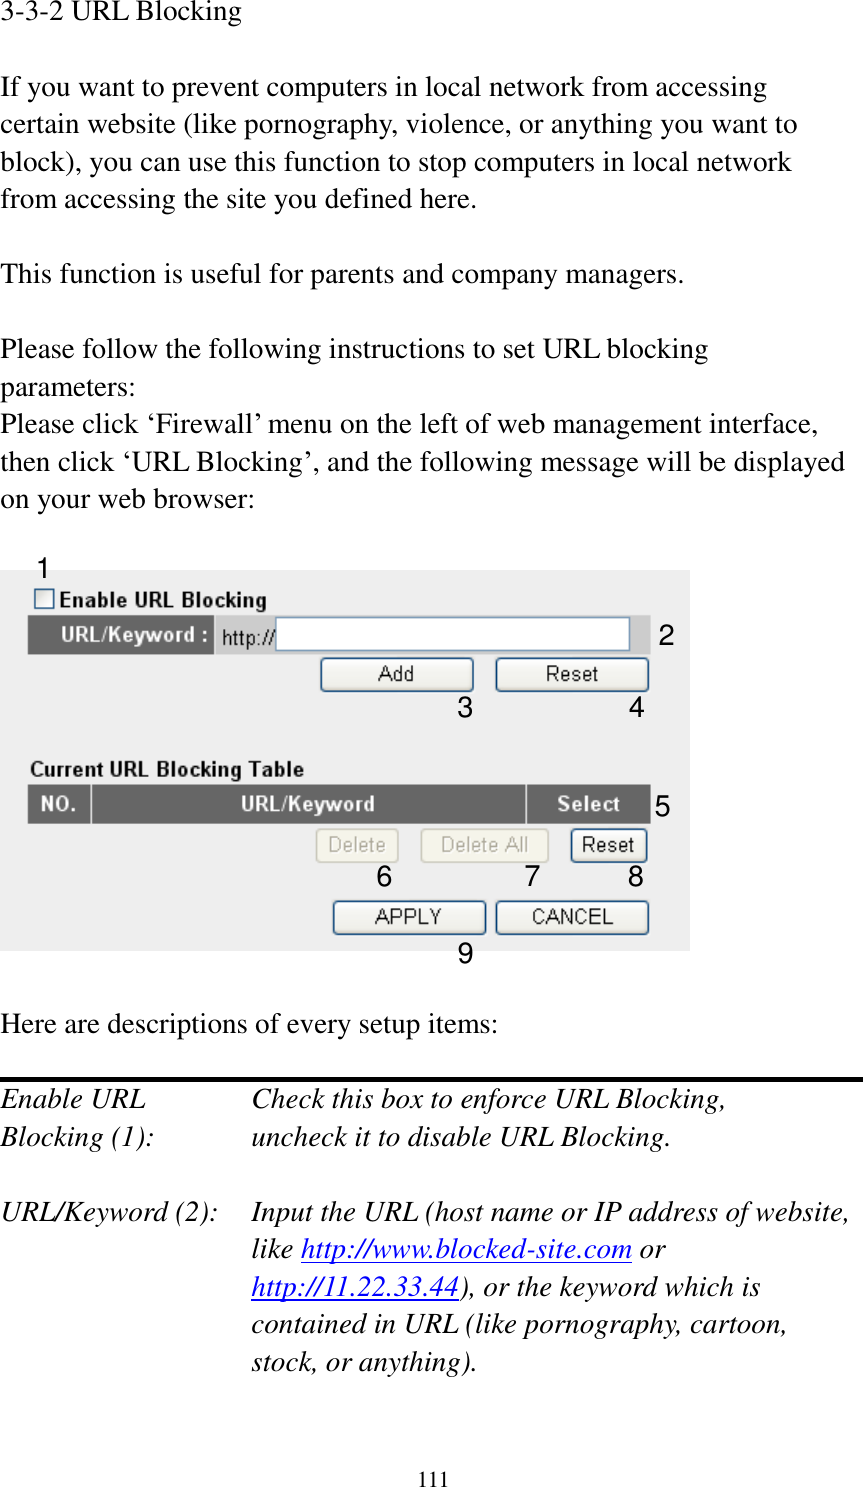 111 3-3-2 URL Blocking  If you want to prevent computers in local network from accessing certain website (like pornography, violence, or anything you want to block), you can use this function to stop computers in local network from accessing the site you defined here.  This function is useful for parents and company managers.  Please follow the following instructions to set URL blocking parameters: Please click „Firewall‟ menu on the left of web management interface, then click „URL Blocking‟, and the following message will be displayed on your web browser:    Here are descriptions of every setup items:  Enable URL      Check this box to enforce URL Blocking, Blocking (1):      uncheck it to disable URL Blocking.  URL/Keyword (2):    Input the URL (host name or IP address of website, like http://www.blocked-site.com or http://11.22.33.44), or the keyword which is contained in URL (like pornography, cartoon, stock, or anything).  2 3 4 5 6 7 8 9 1 